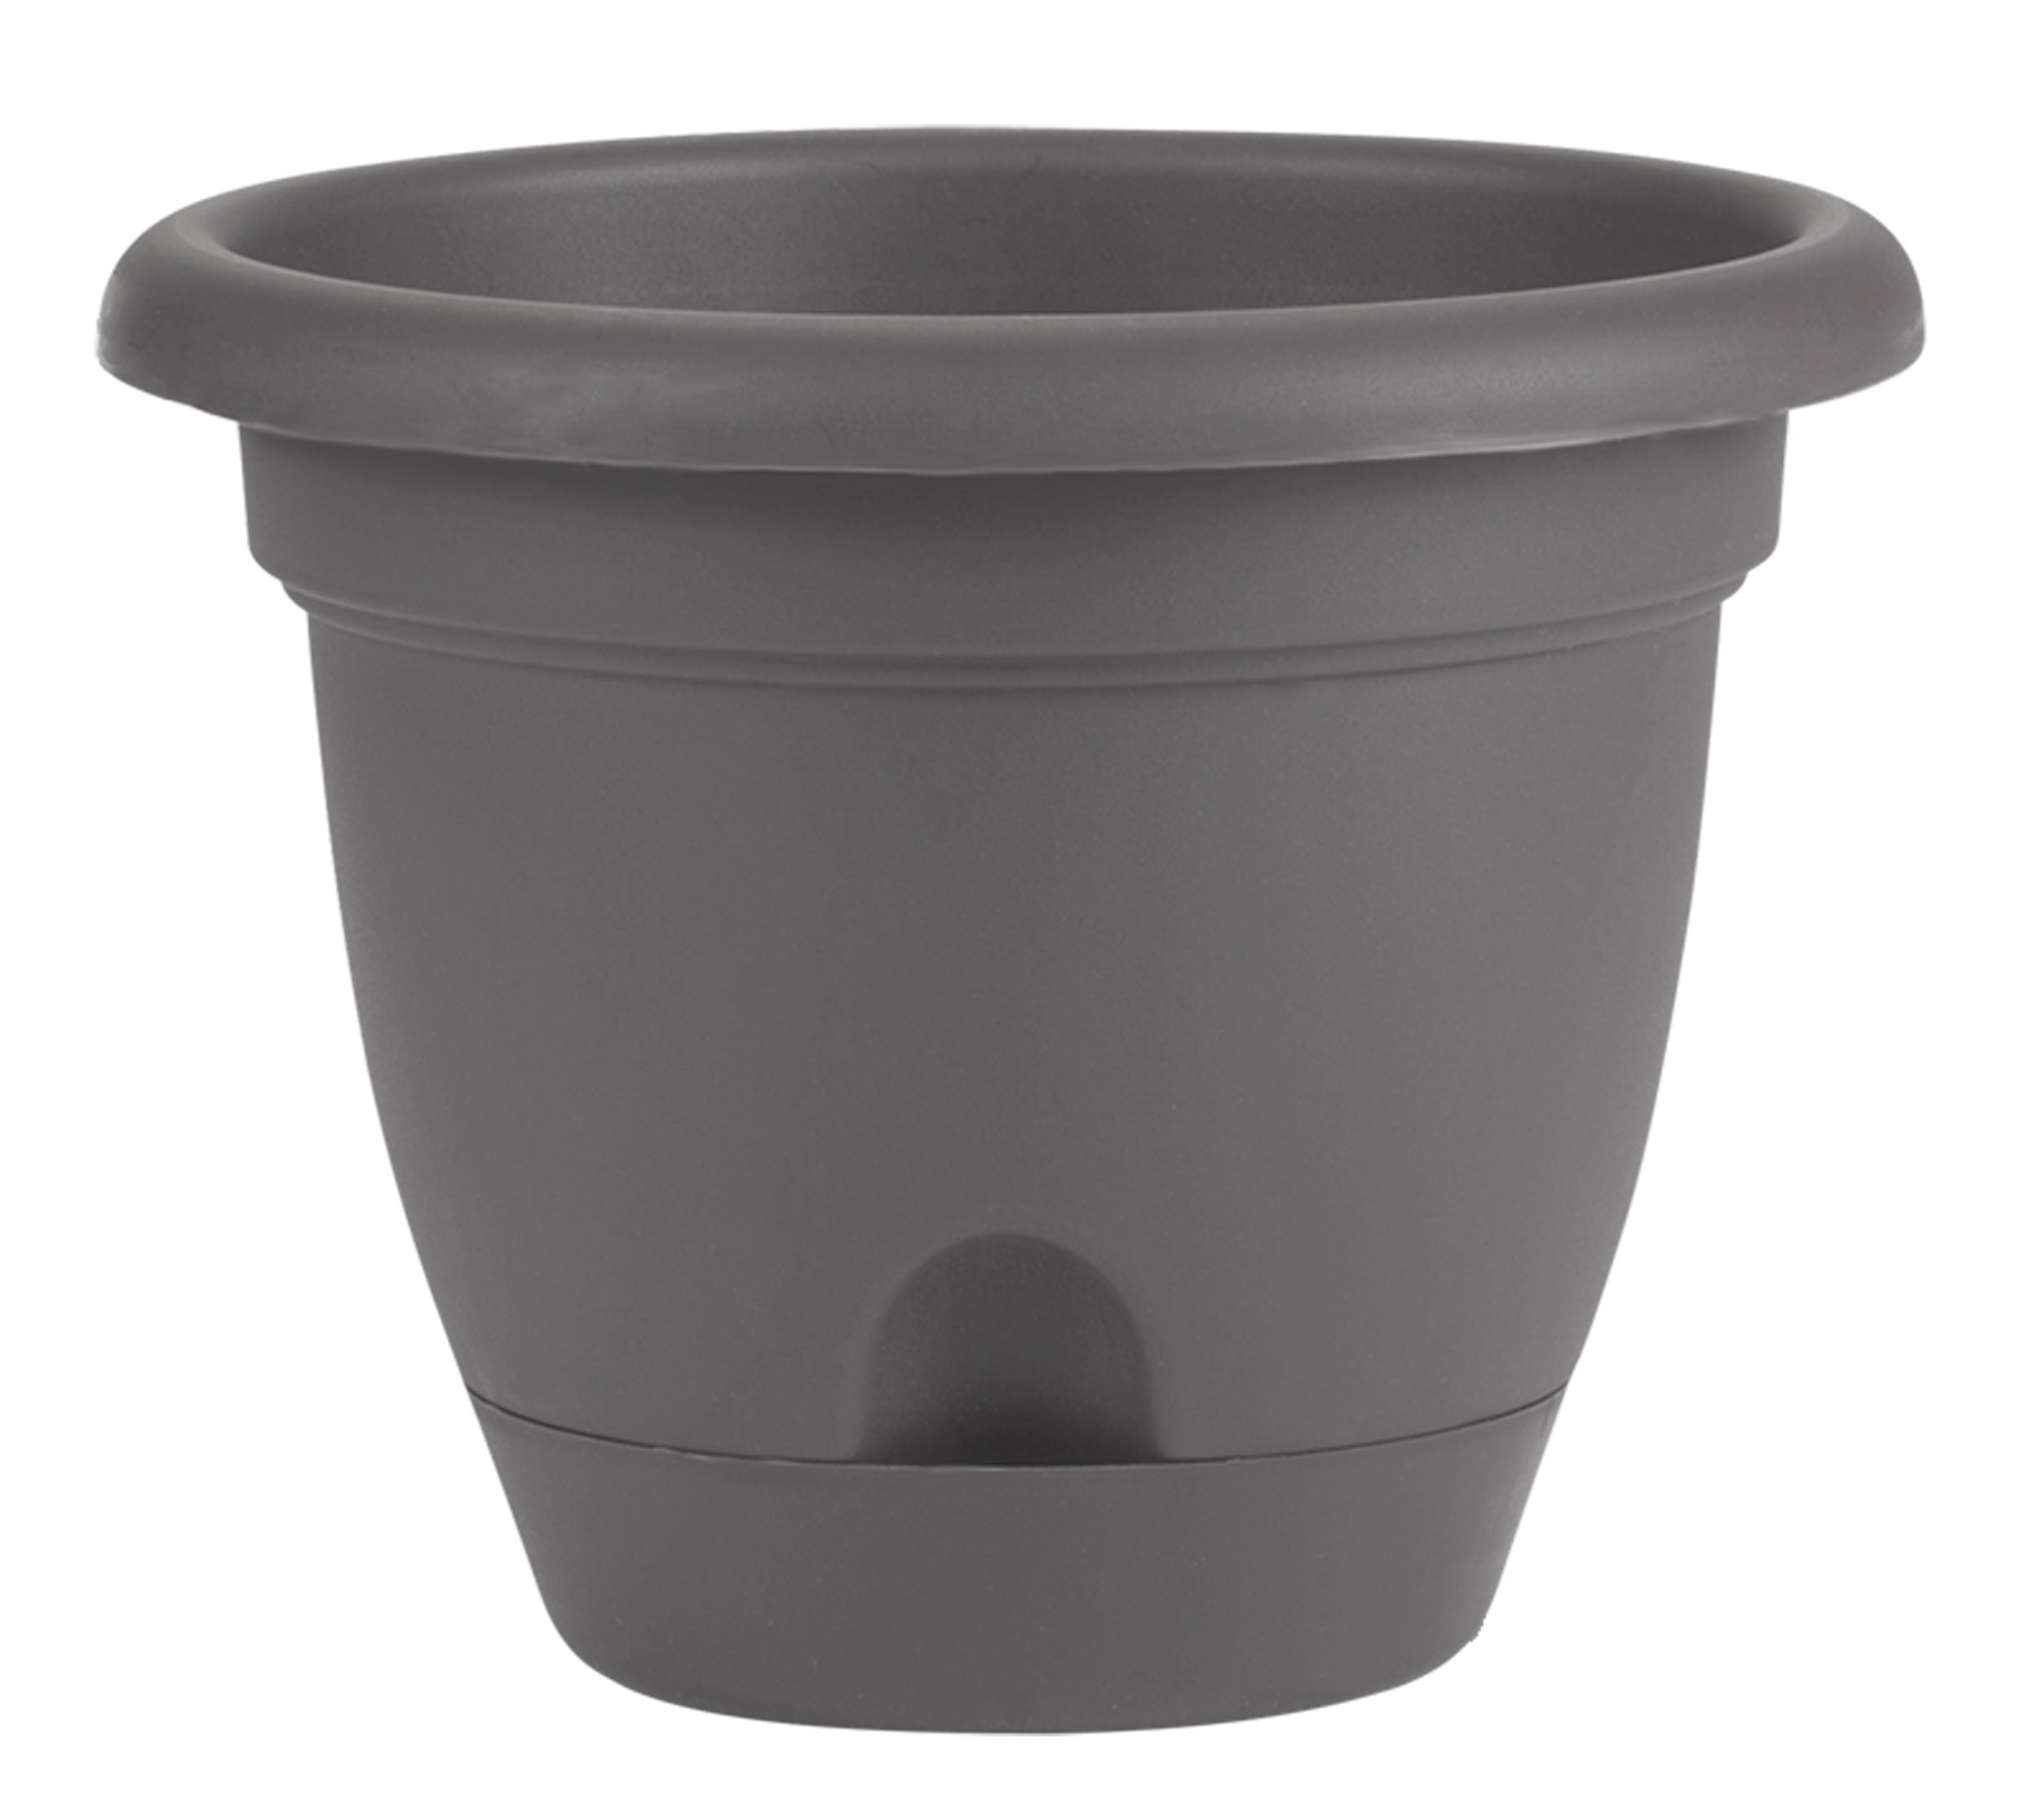 Bloem Lucca Self Watering Planter W/ Saucer 13.25 x 10.75 Plastic Round  Charcoal Gray